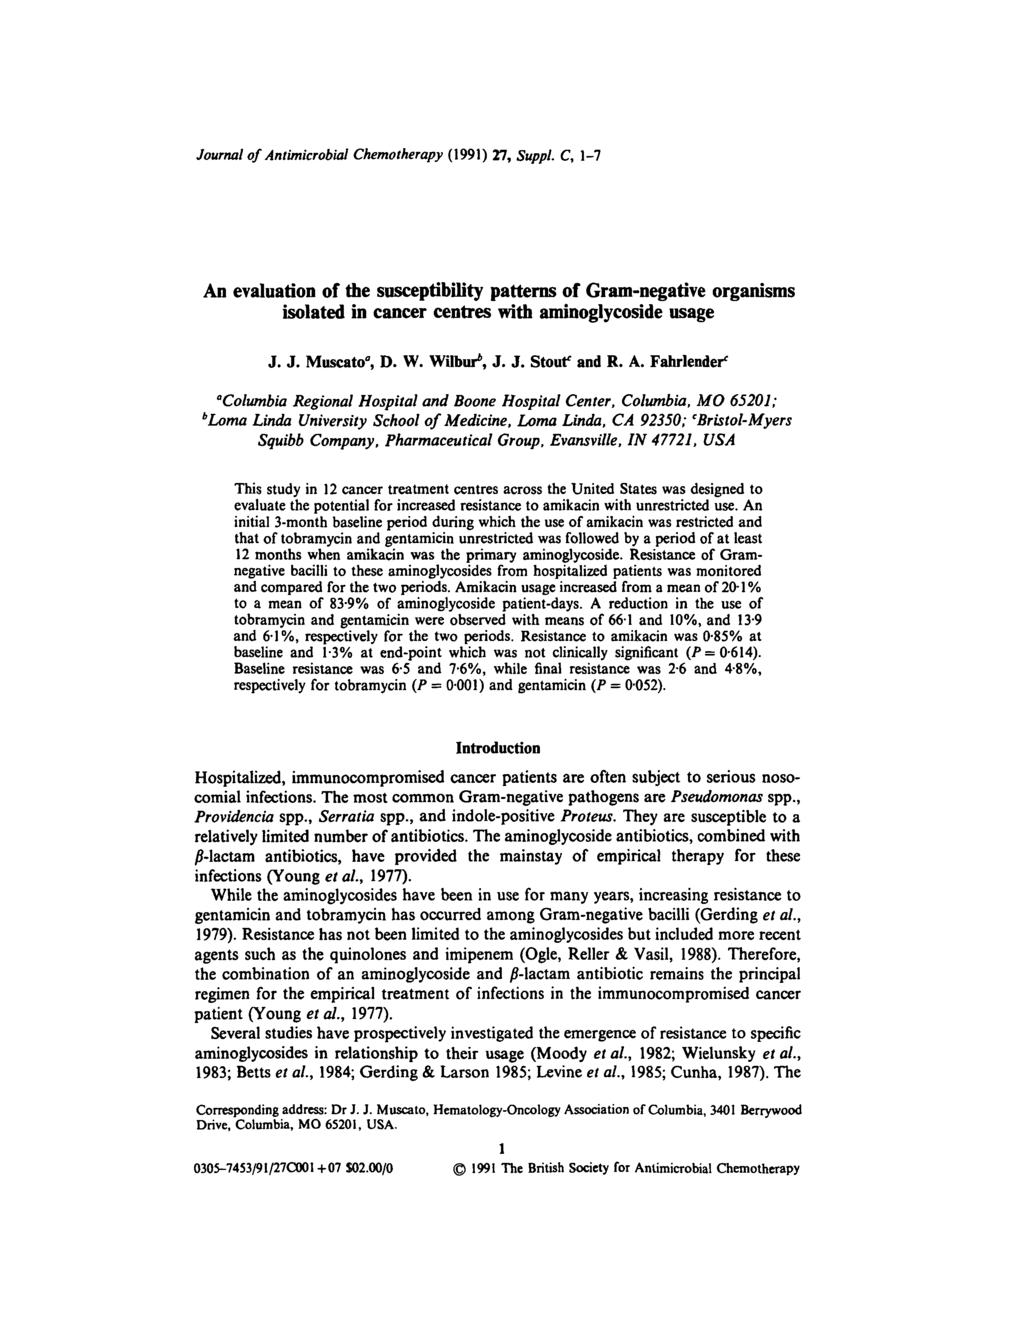 Journal of Antimicrobial Chemotherapy (1991) 27, Suppl. C, 1-7 An evaluation of the susceptibility patterns of Gram-negative organisms isolated in cancer centres with aminoglycoside usage J.